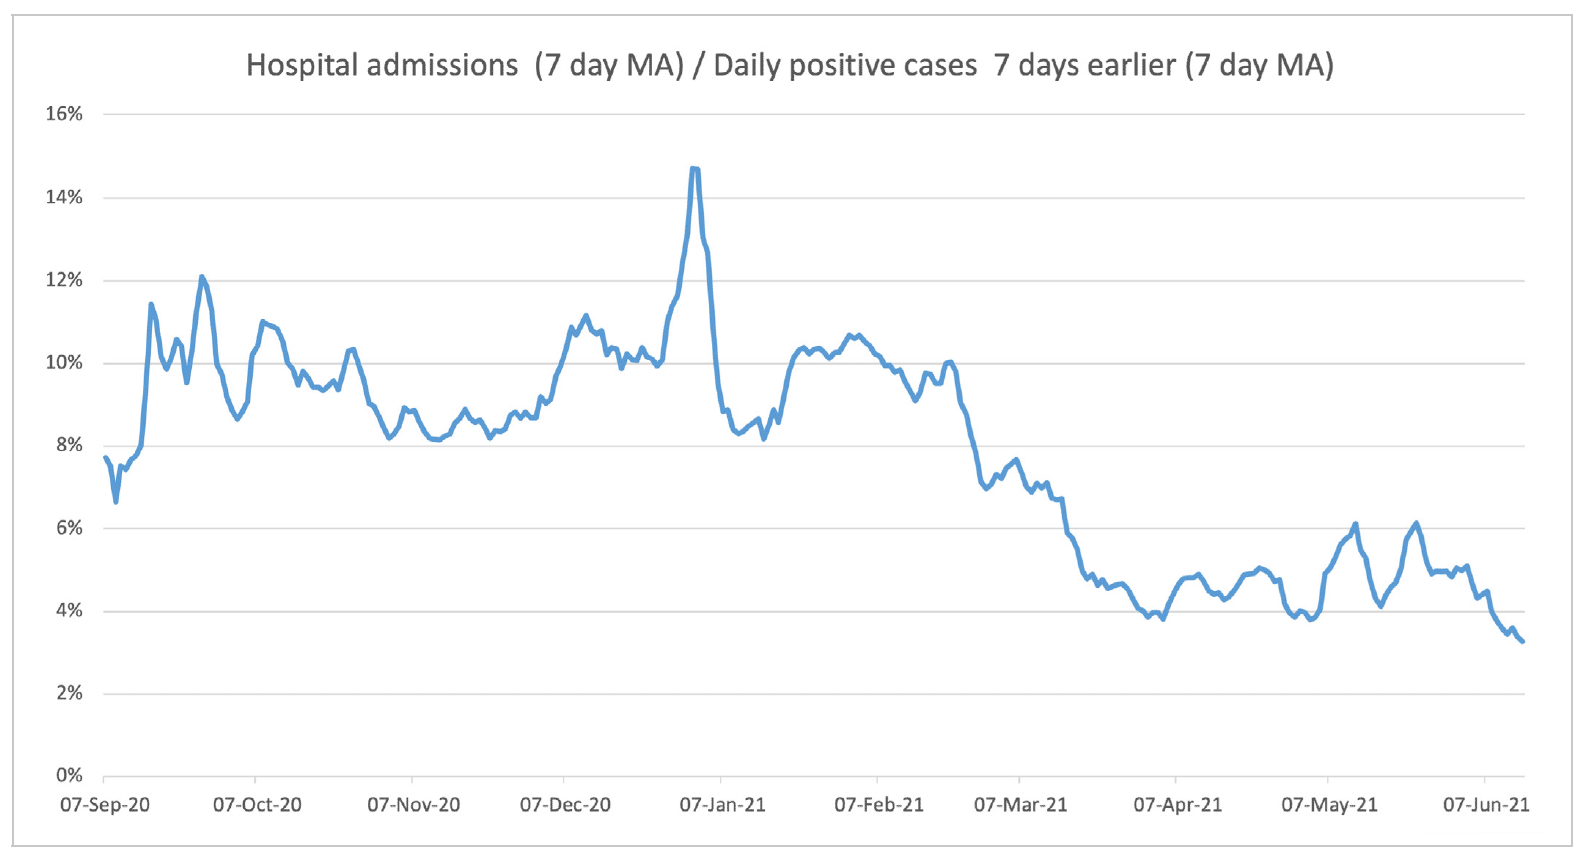 This line graph shows the number of COVID hospital admissions divided by the number of COVID cases the week before, averaged over 7 days, from the 1st of May 2020 to the 14th of June 2021. This suggests that the proportion of COVID case that have resulted in hospital admission has decreased from around 20% in June and July 2020, to around 10% from September 2020 to February 2021, and then to around 5% from April to June 2021.